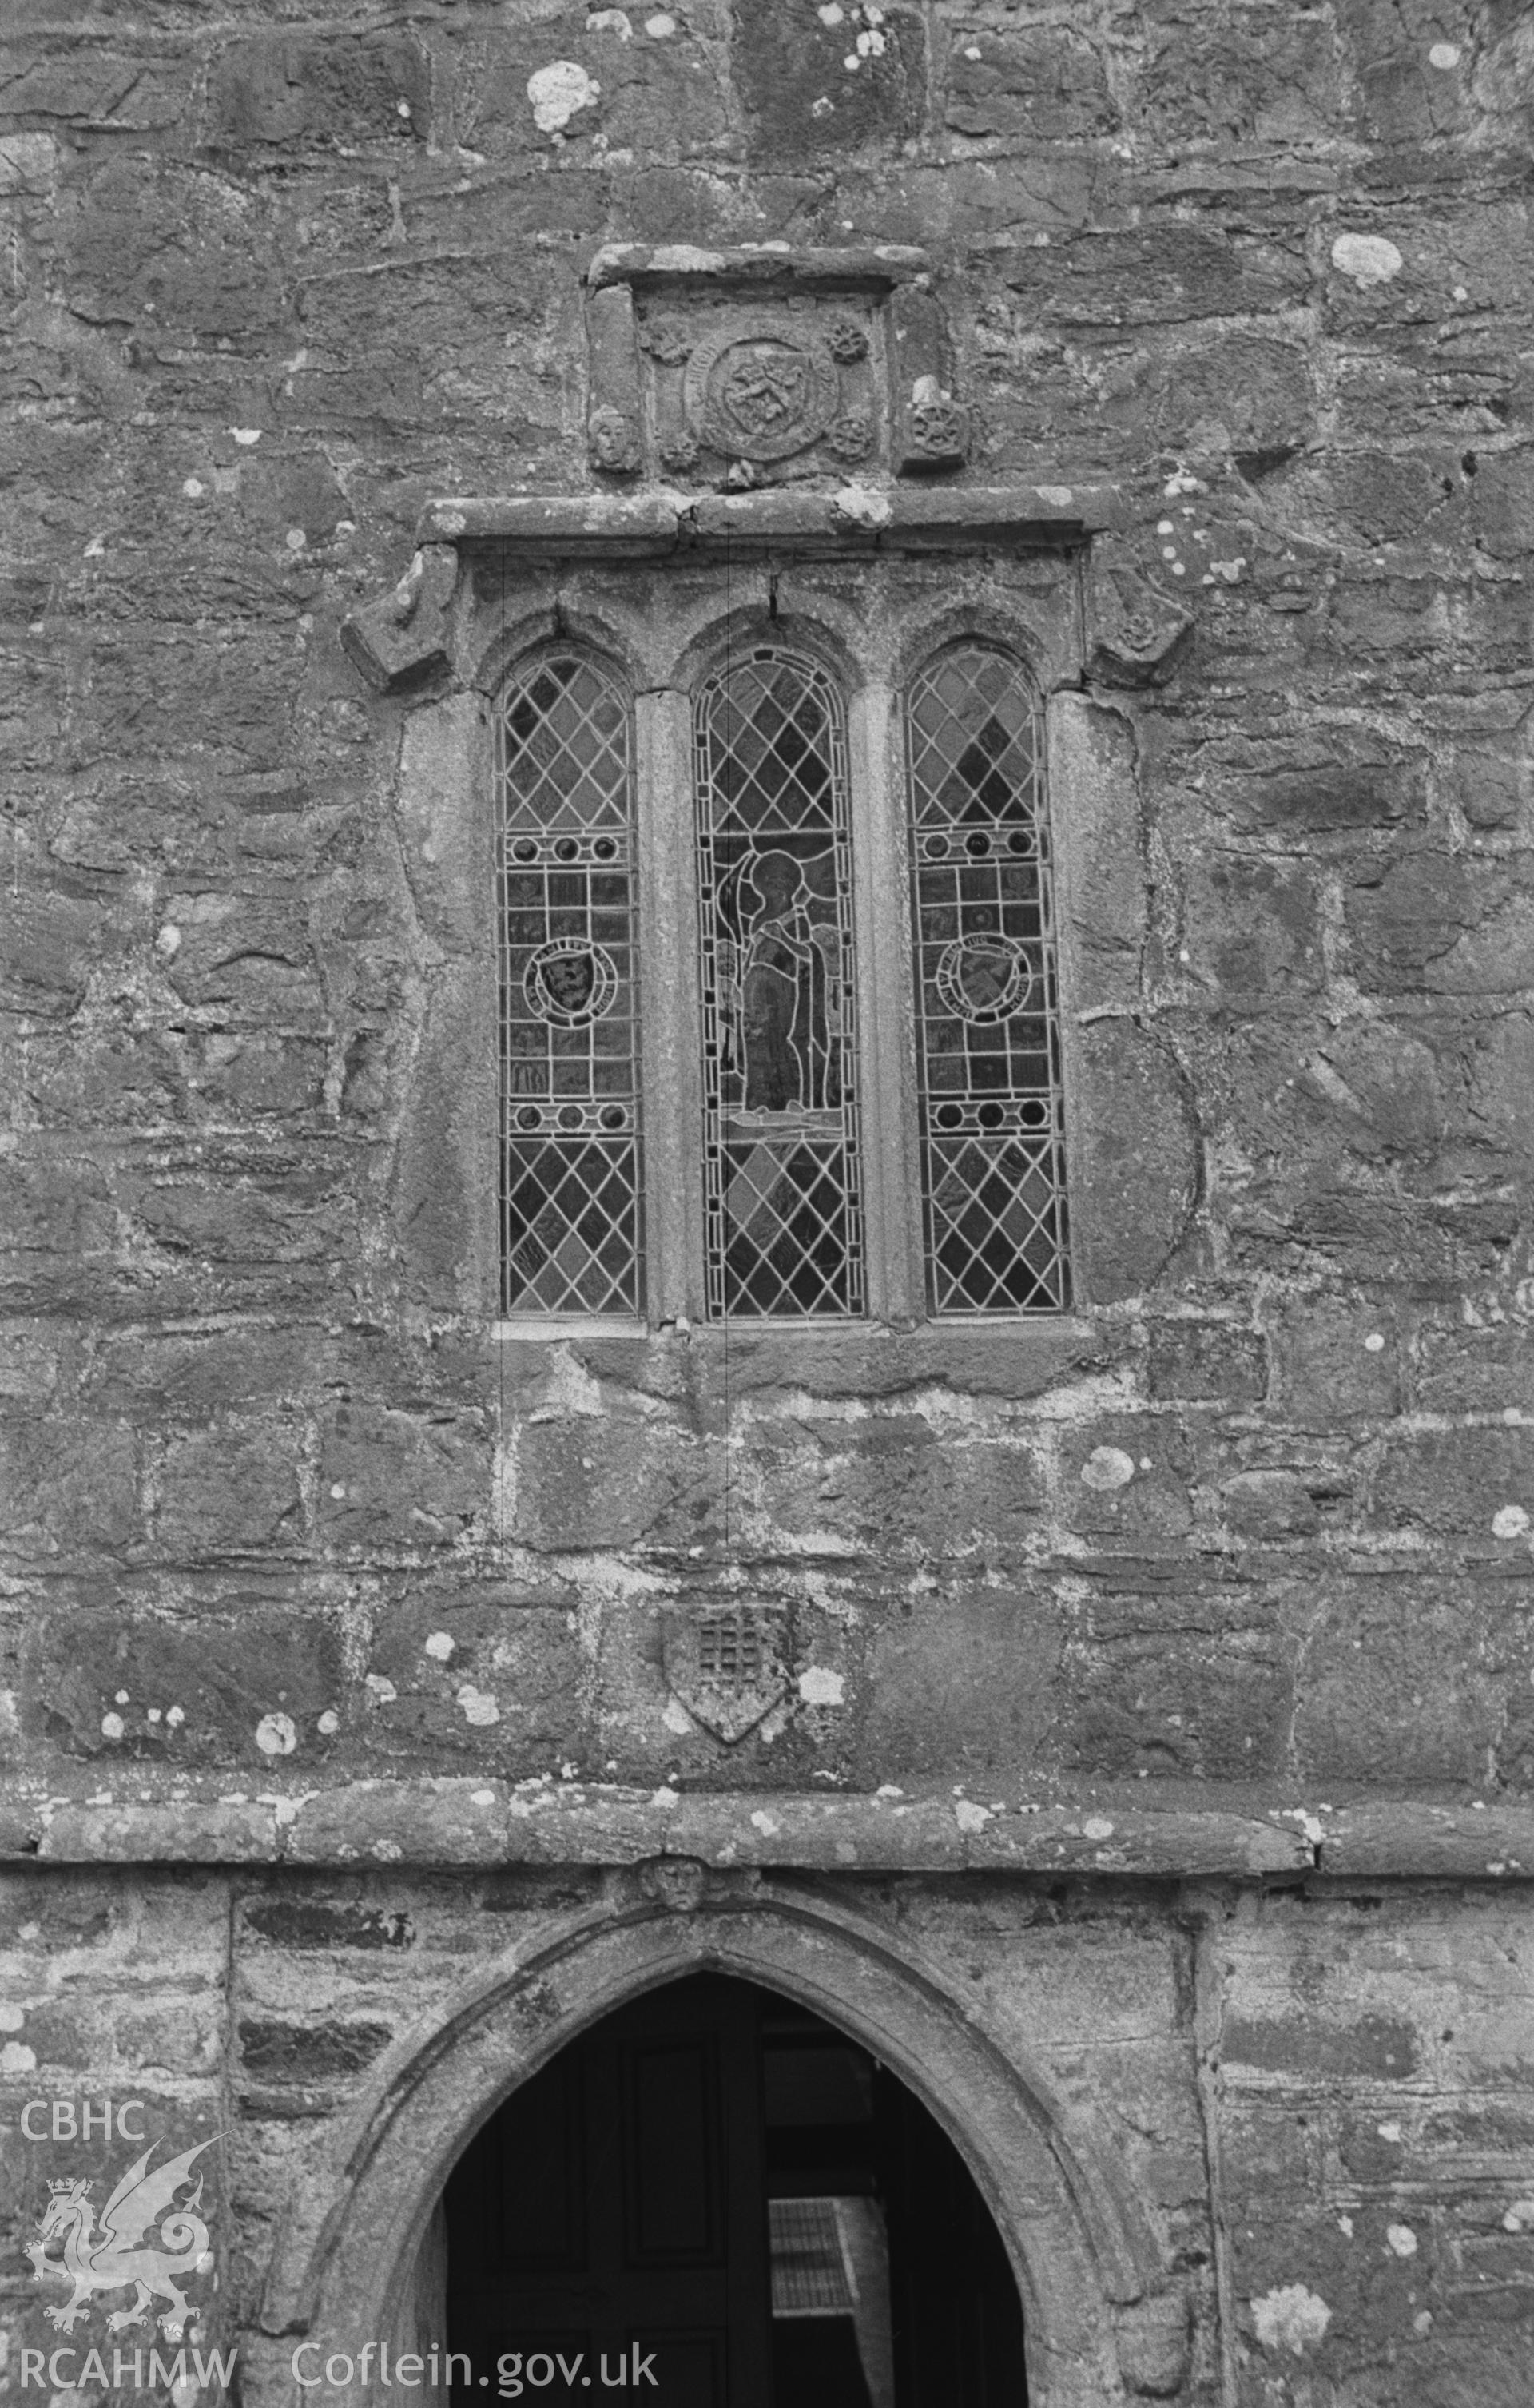 Digital copy of a black and white negative showing west door and window of St Gwenog's church, Llanwenog, at the base of the tower. Photographed in April 1963 by Arthur O. Chater from Grid Reference SN 4937 4552, looking east.